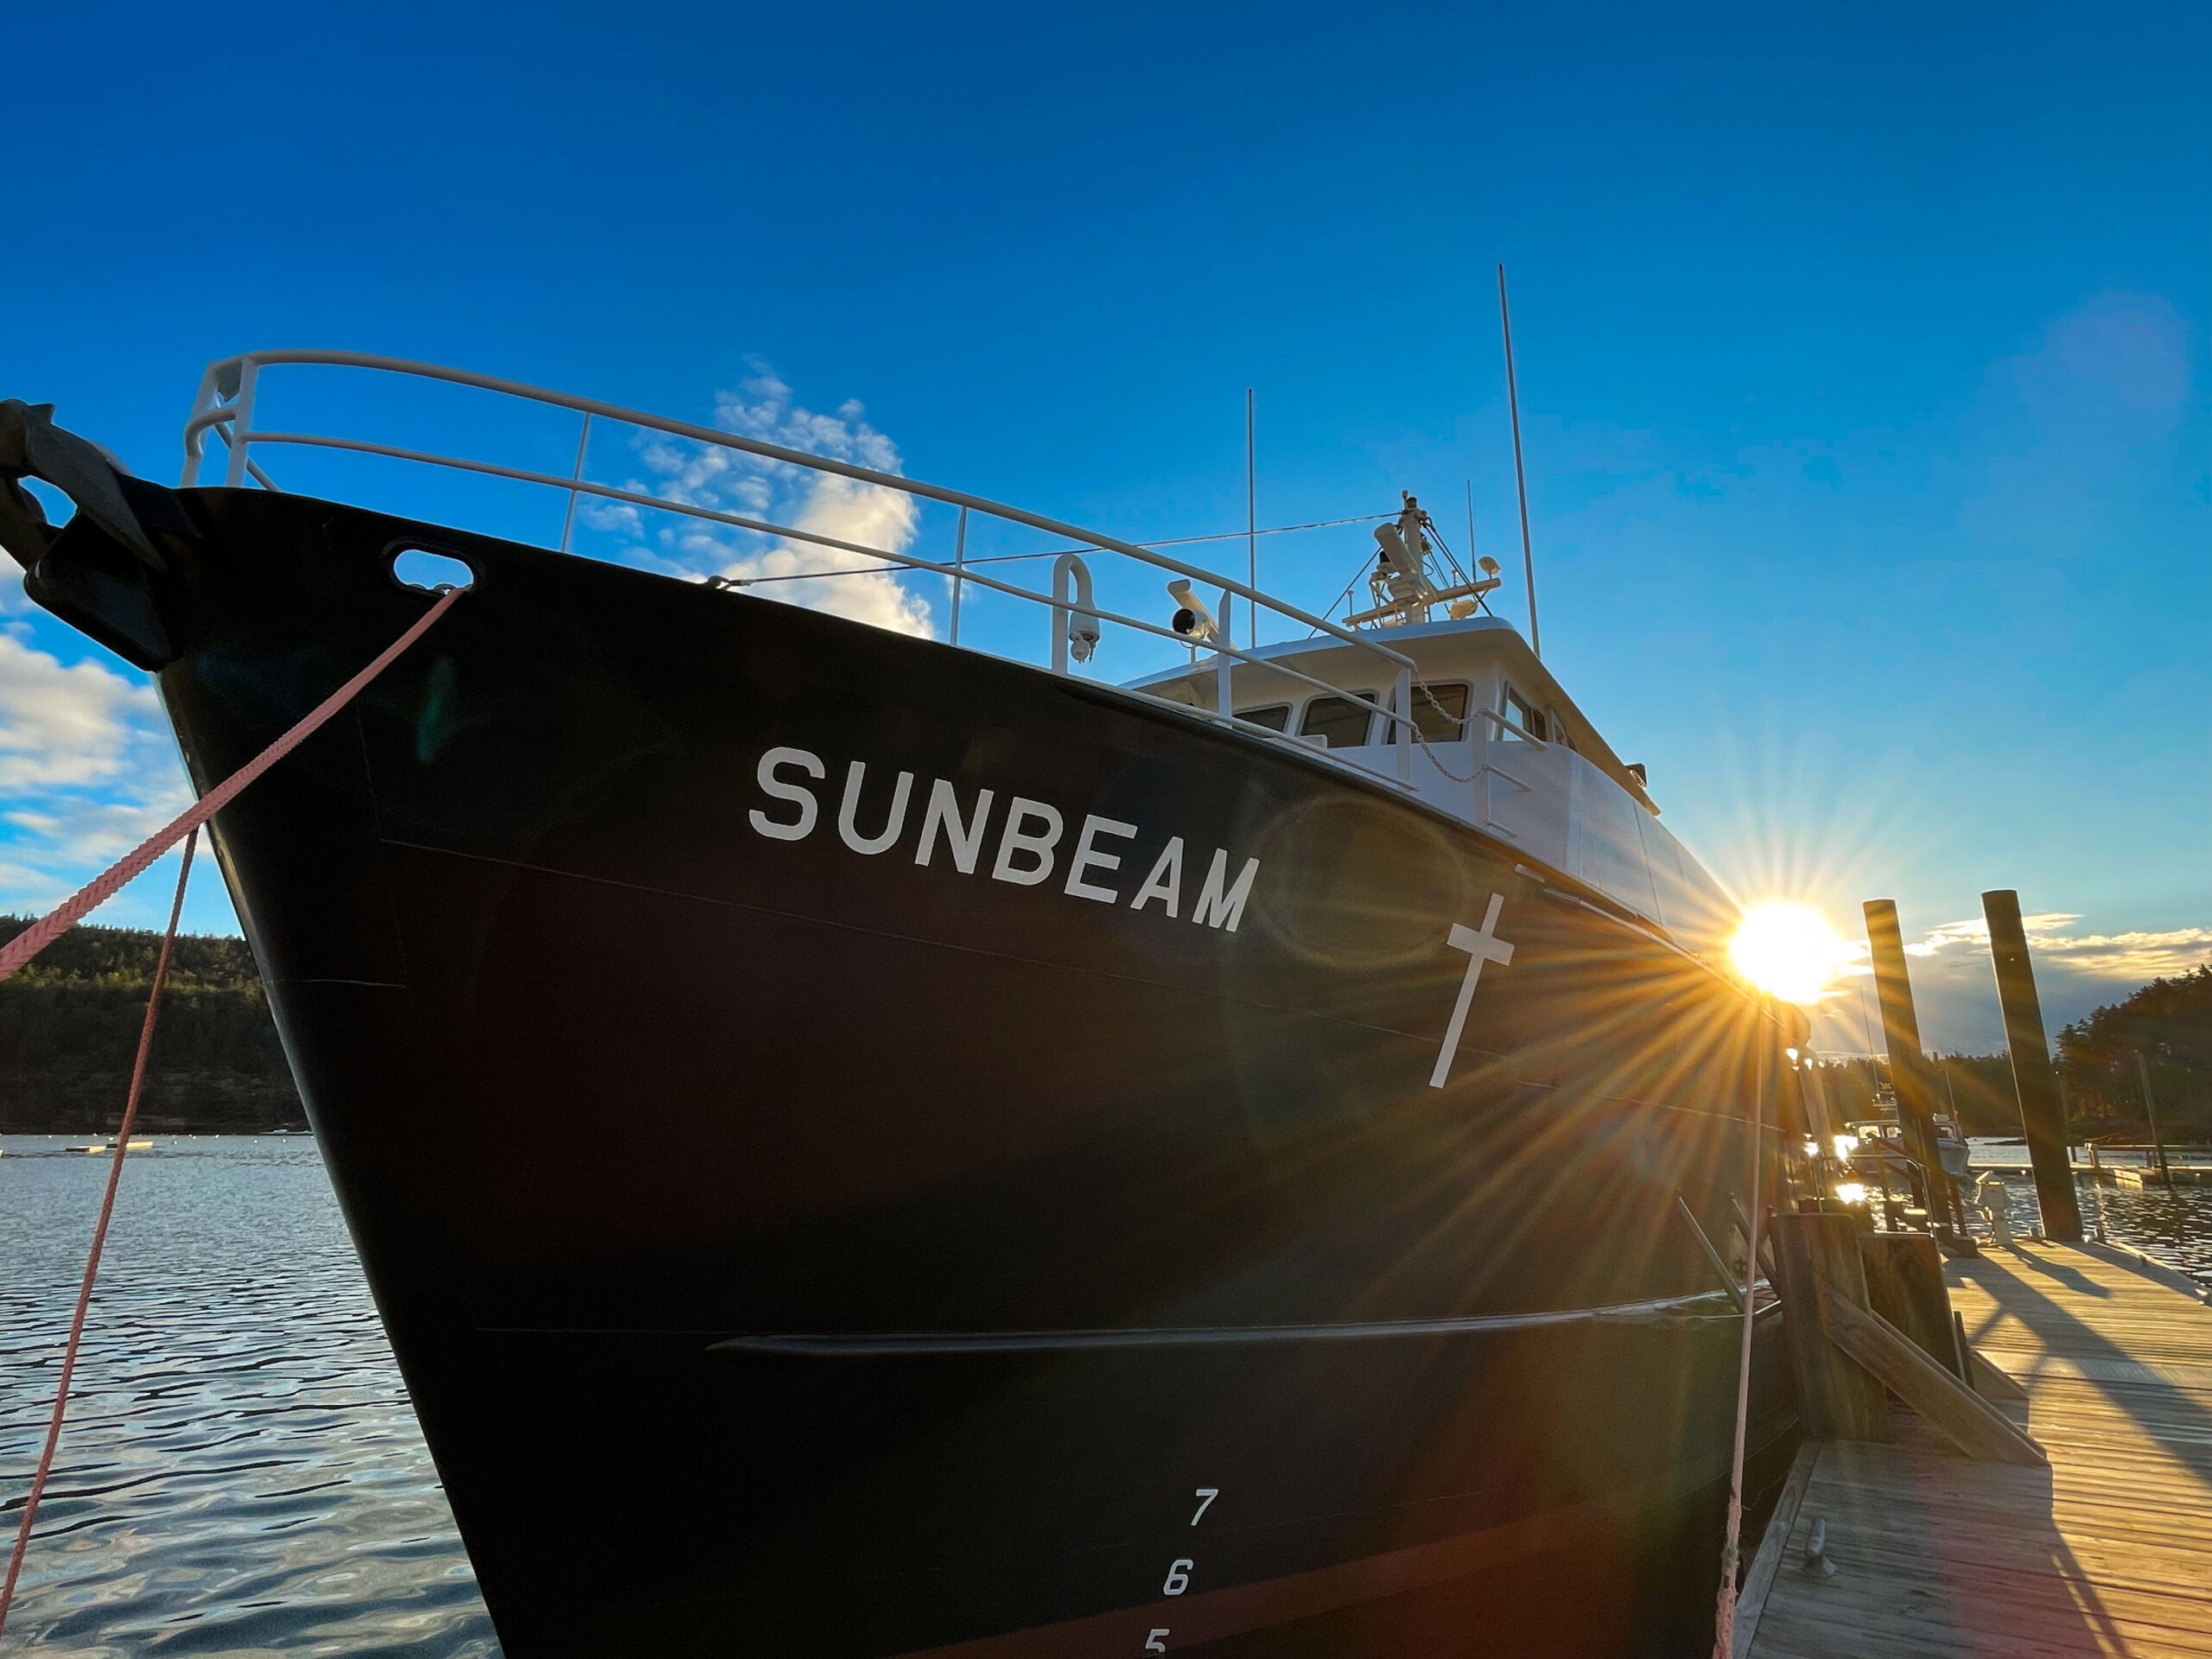 A photo of the Sunbeam boat taken with the name on the hull. The sun is peaking out behind the boat. 